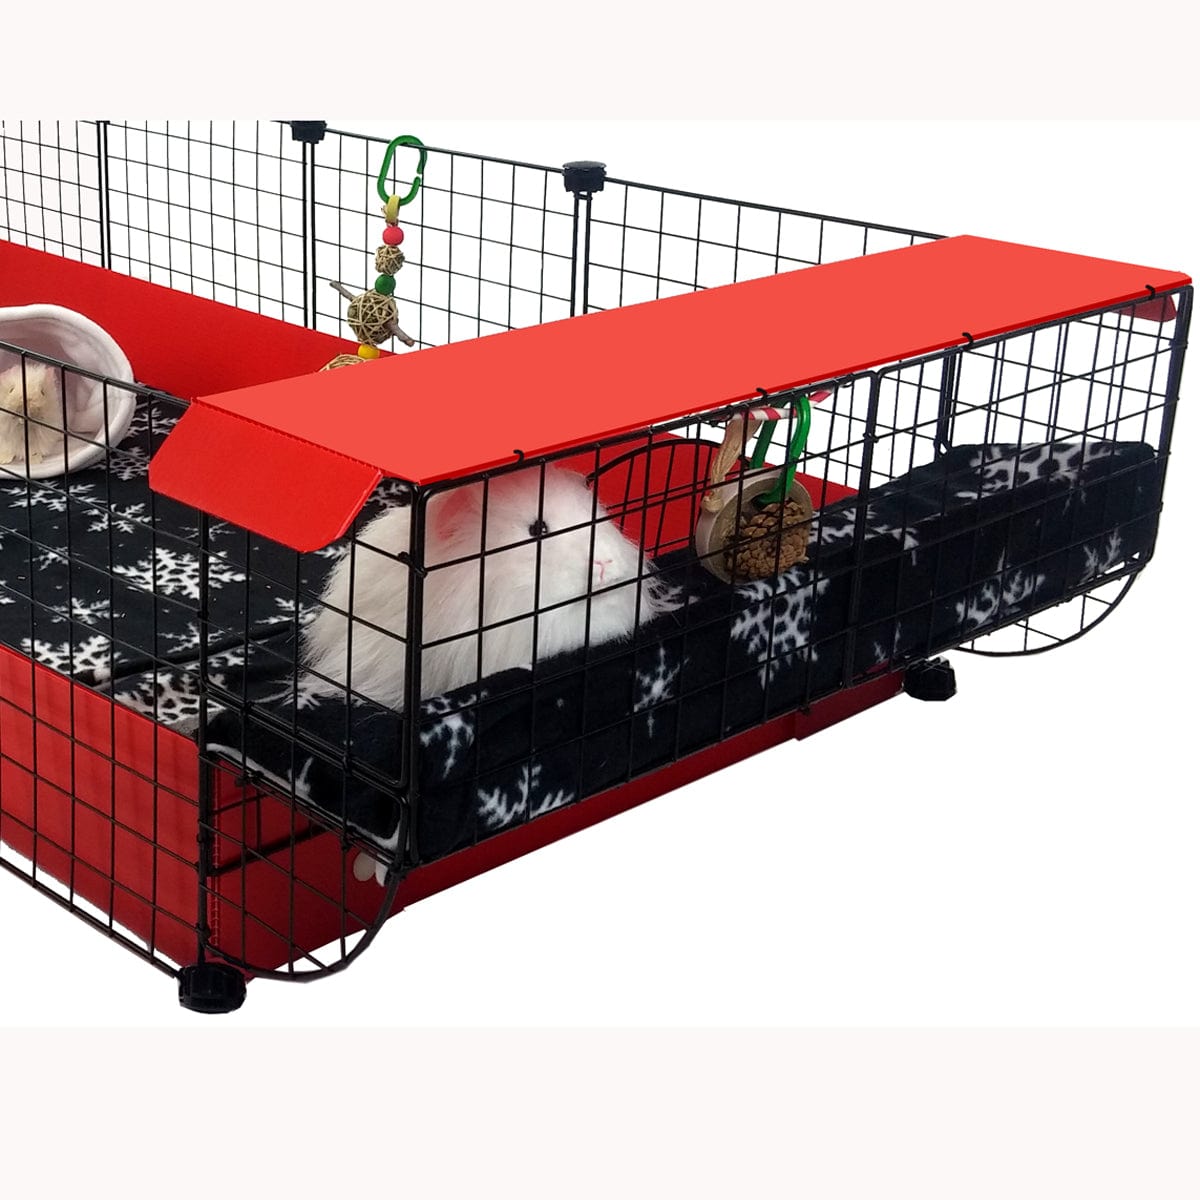 Lookout Lounge assembled in a C&C guinea pig cage